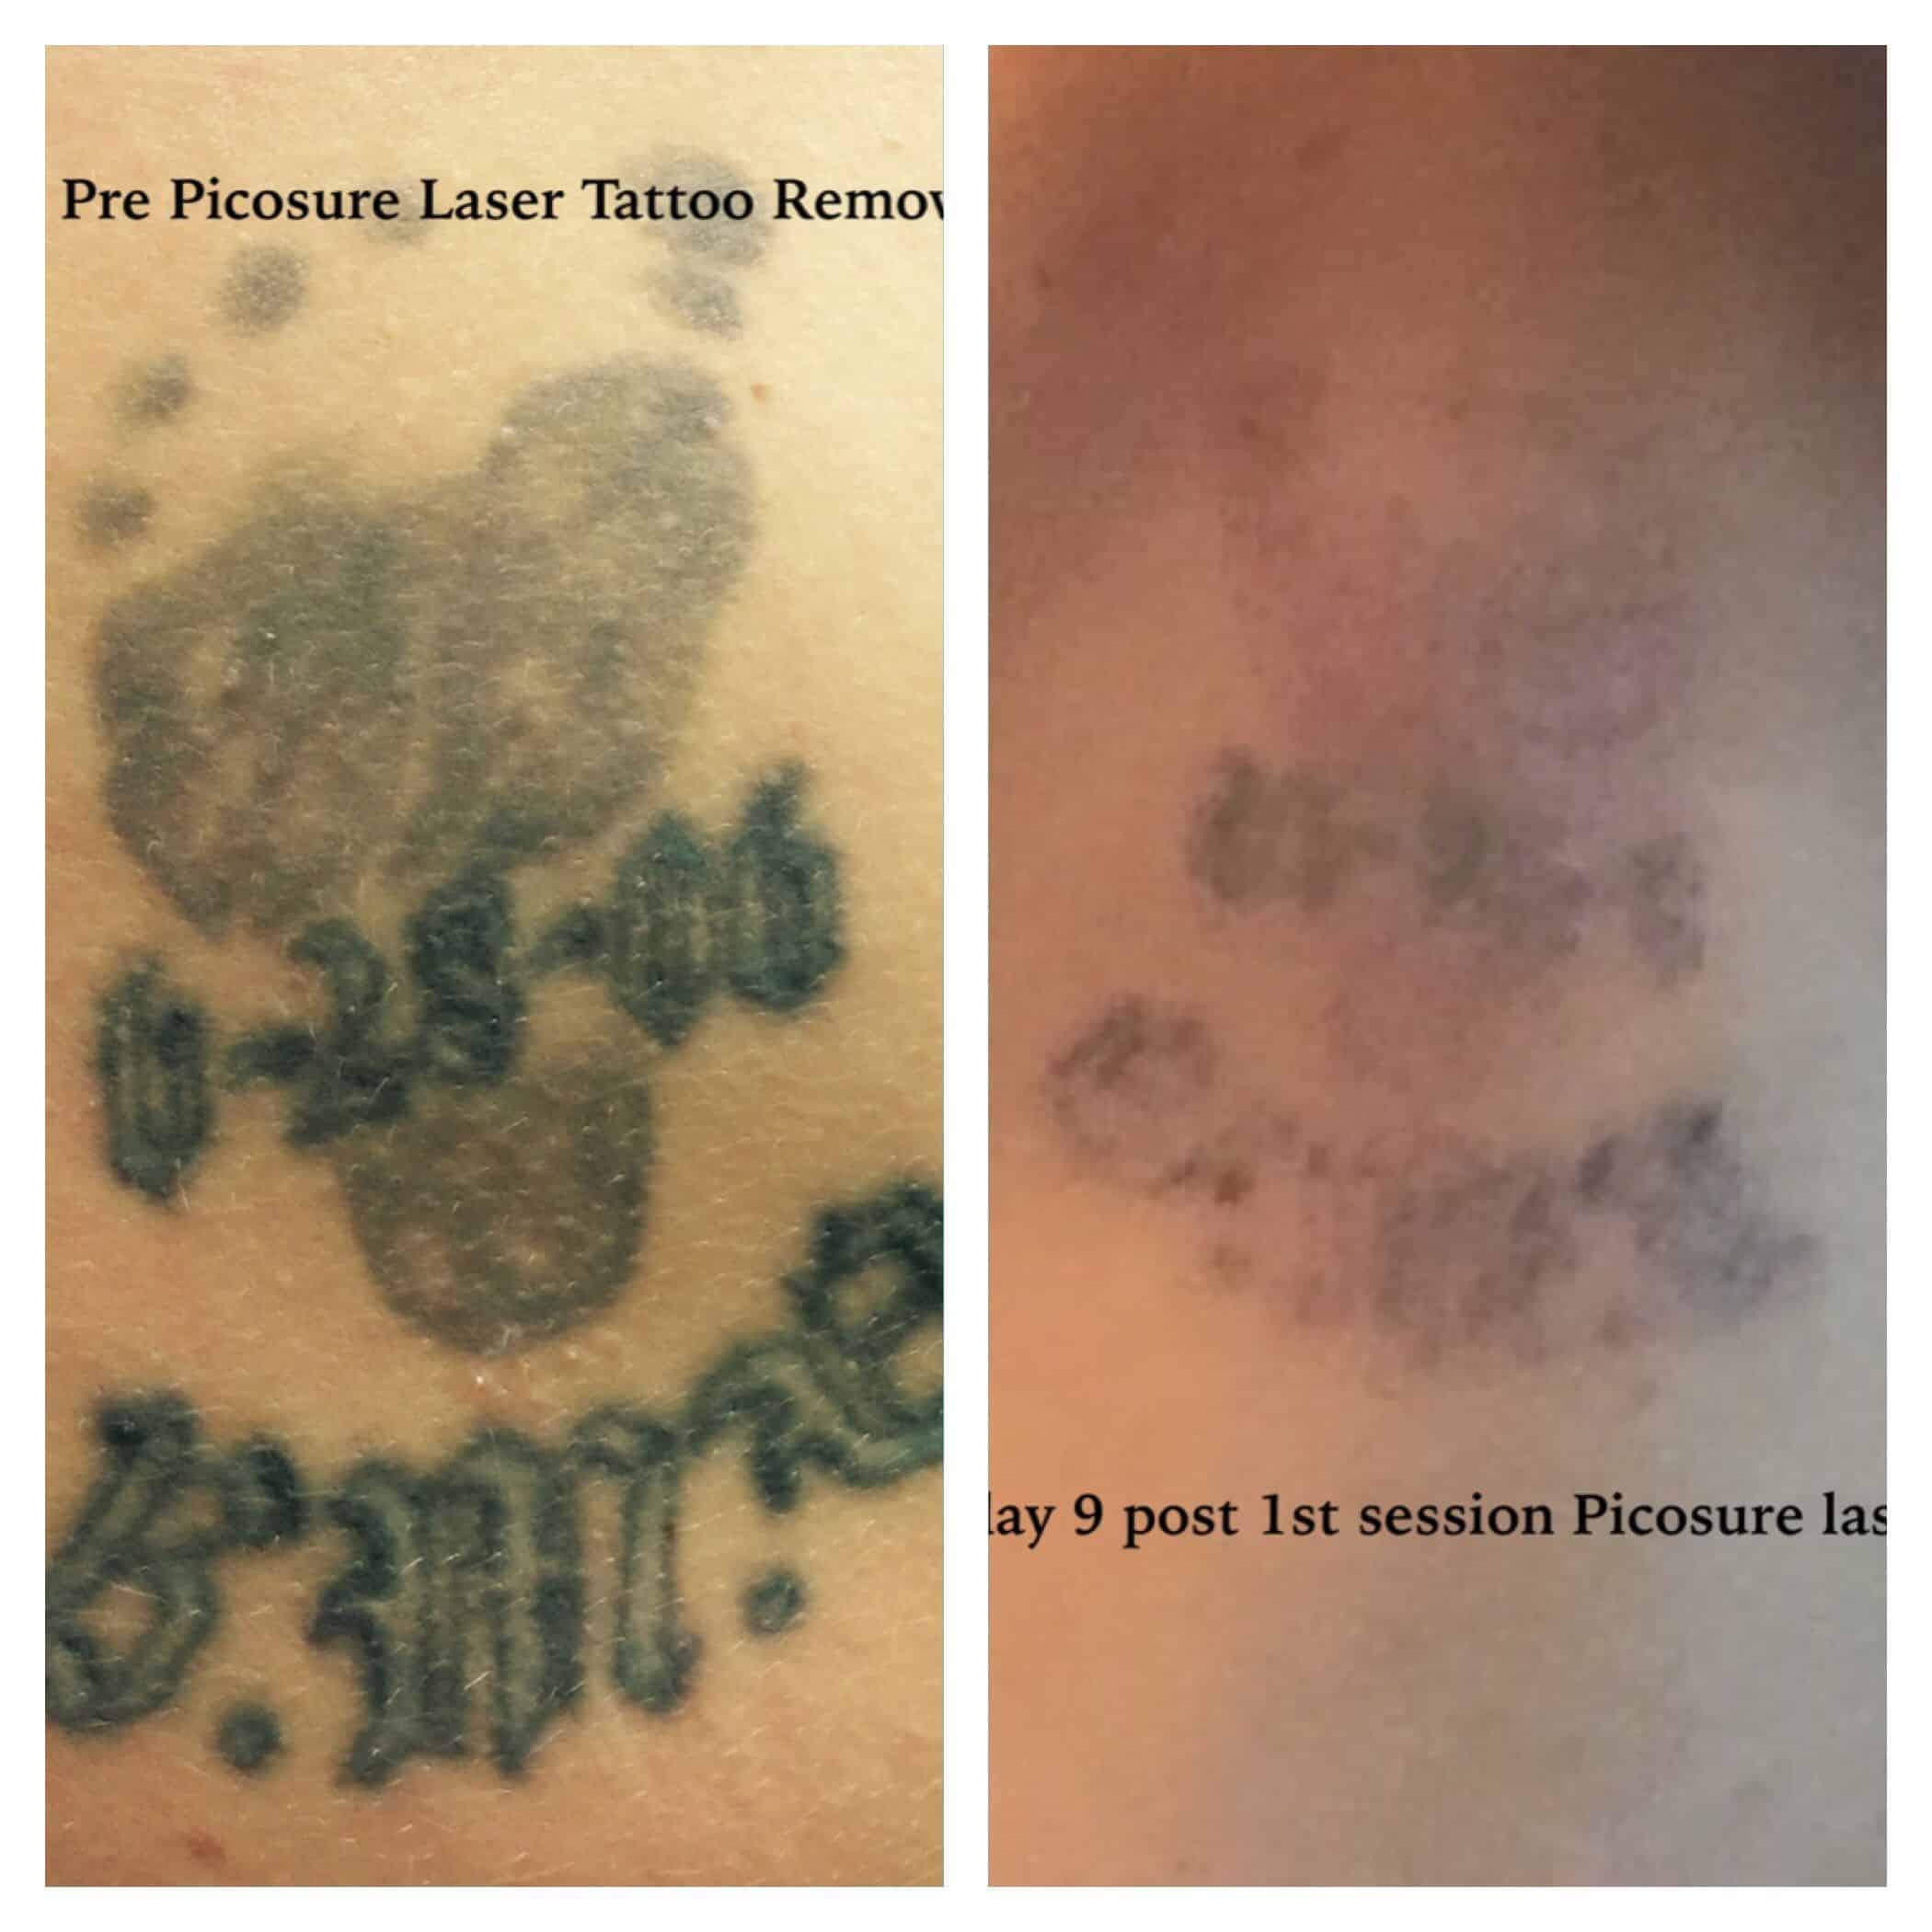 Pre and day 9 post first session of Picosure laser tattoo removal ...